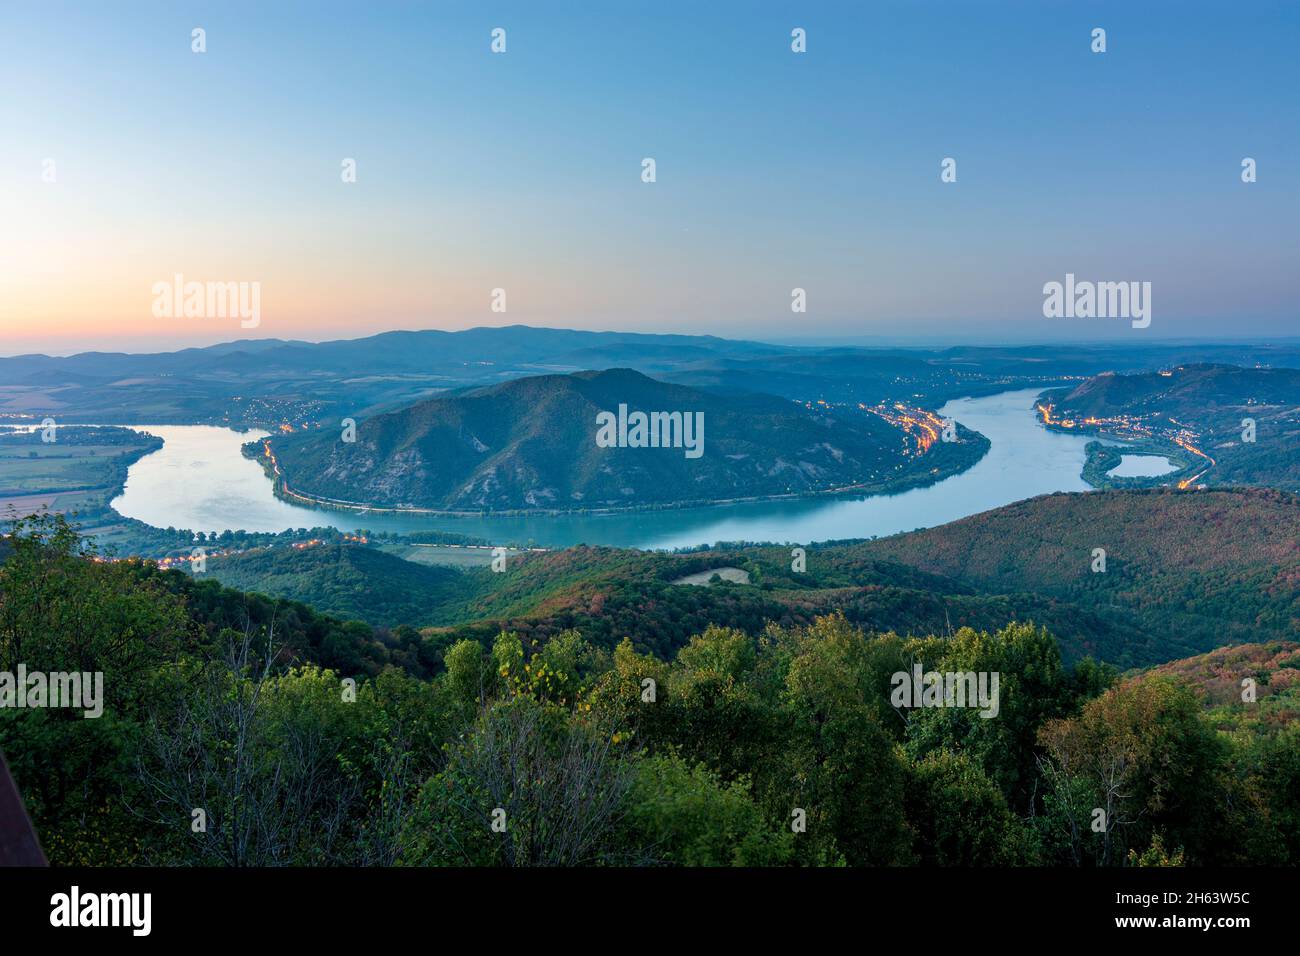 visegrad mountains,bend of danube river,view to börzsöny mountains,view from summit predikaloszek (predigerstuhl,preaching chair) in danube-ipoly national park,pest,hungary Stock Photo